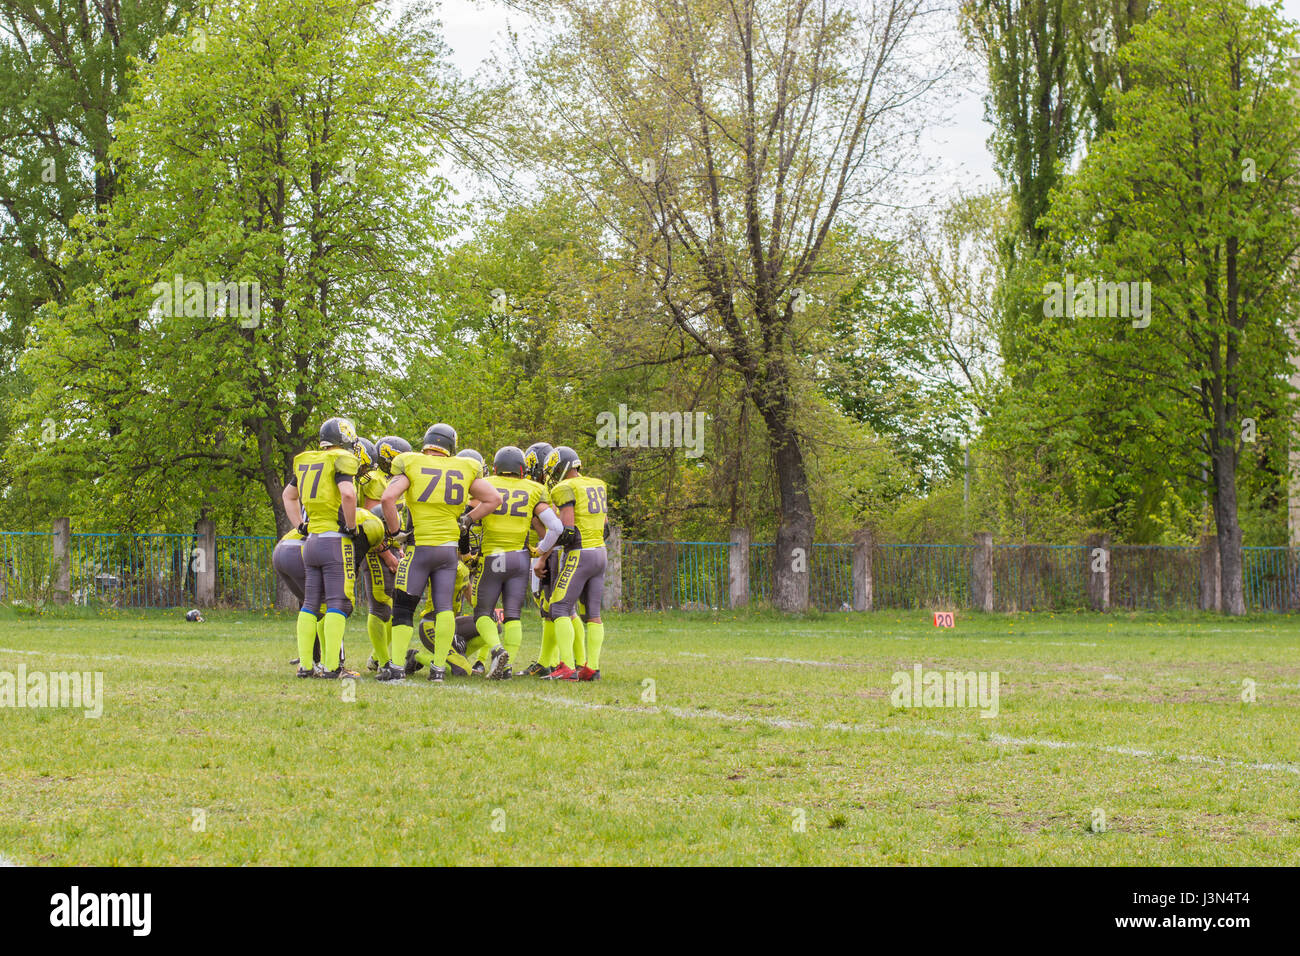 KIEV, UKRAINE - APRIL 29, 2017: players in a huddle during football match between Kiev Rebels and Hrodno Barbarians Stock Photo